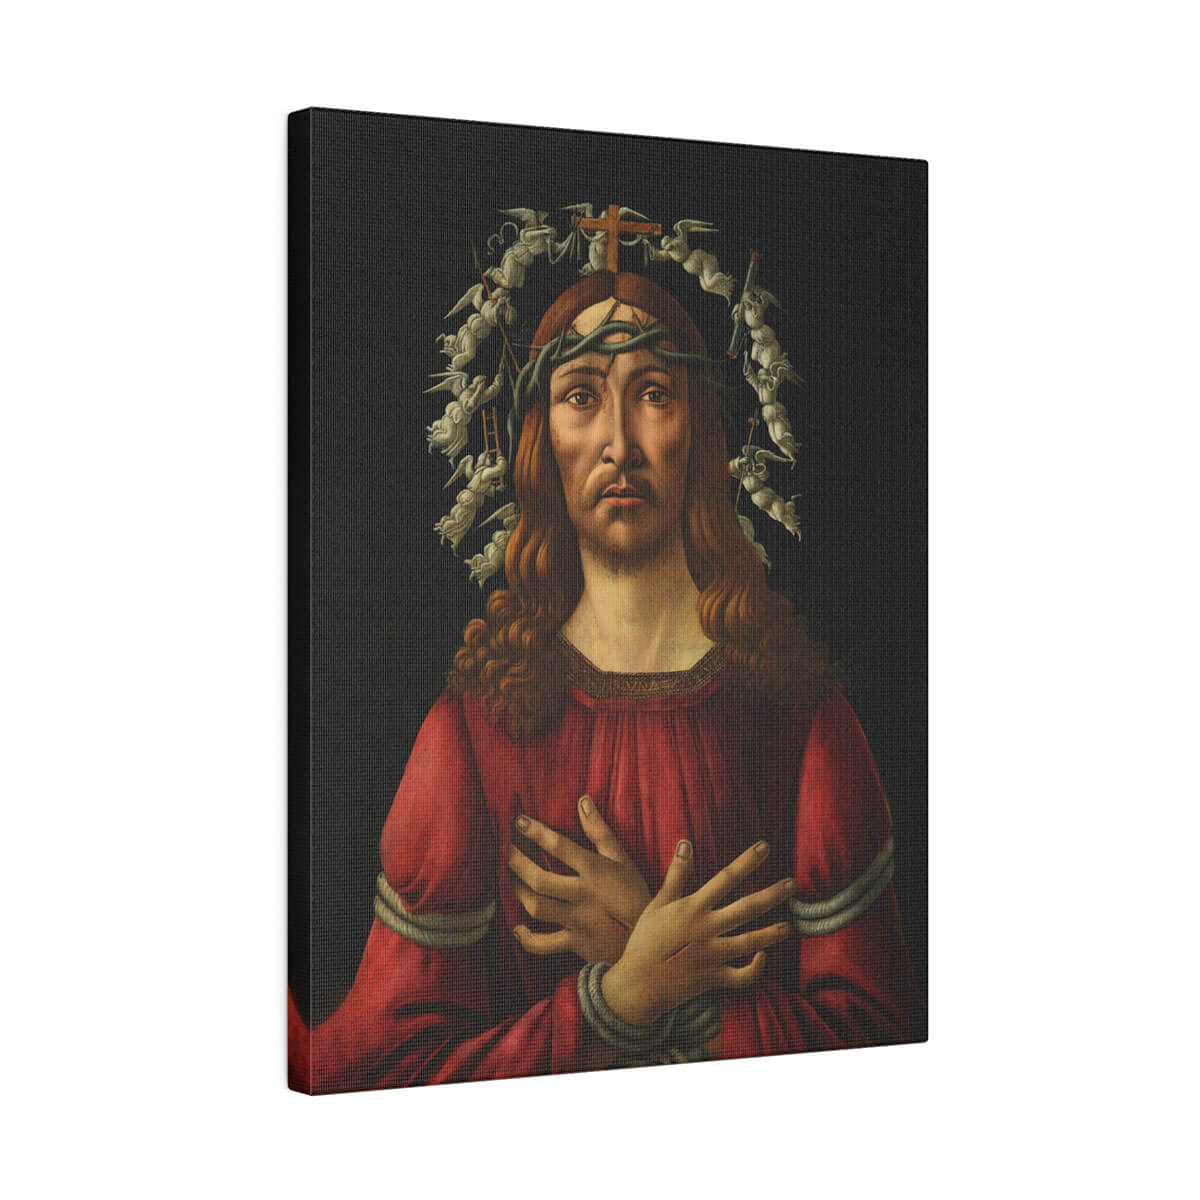 Divine canvas print inspired by Botticelli's masterpiece